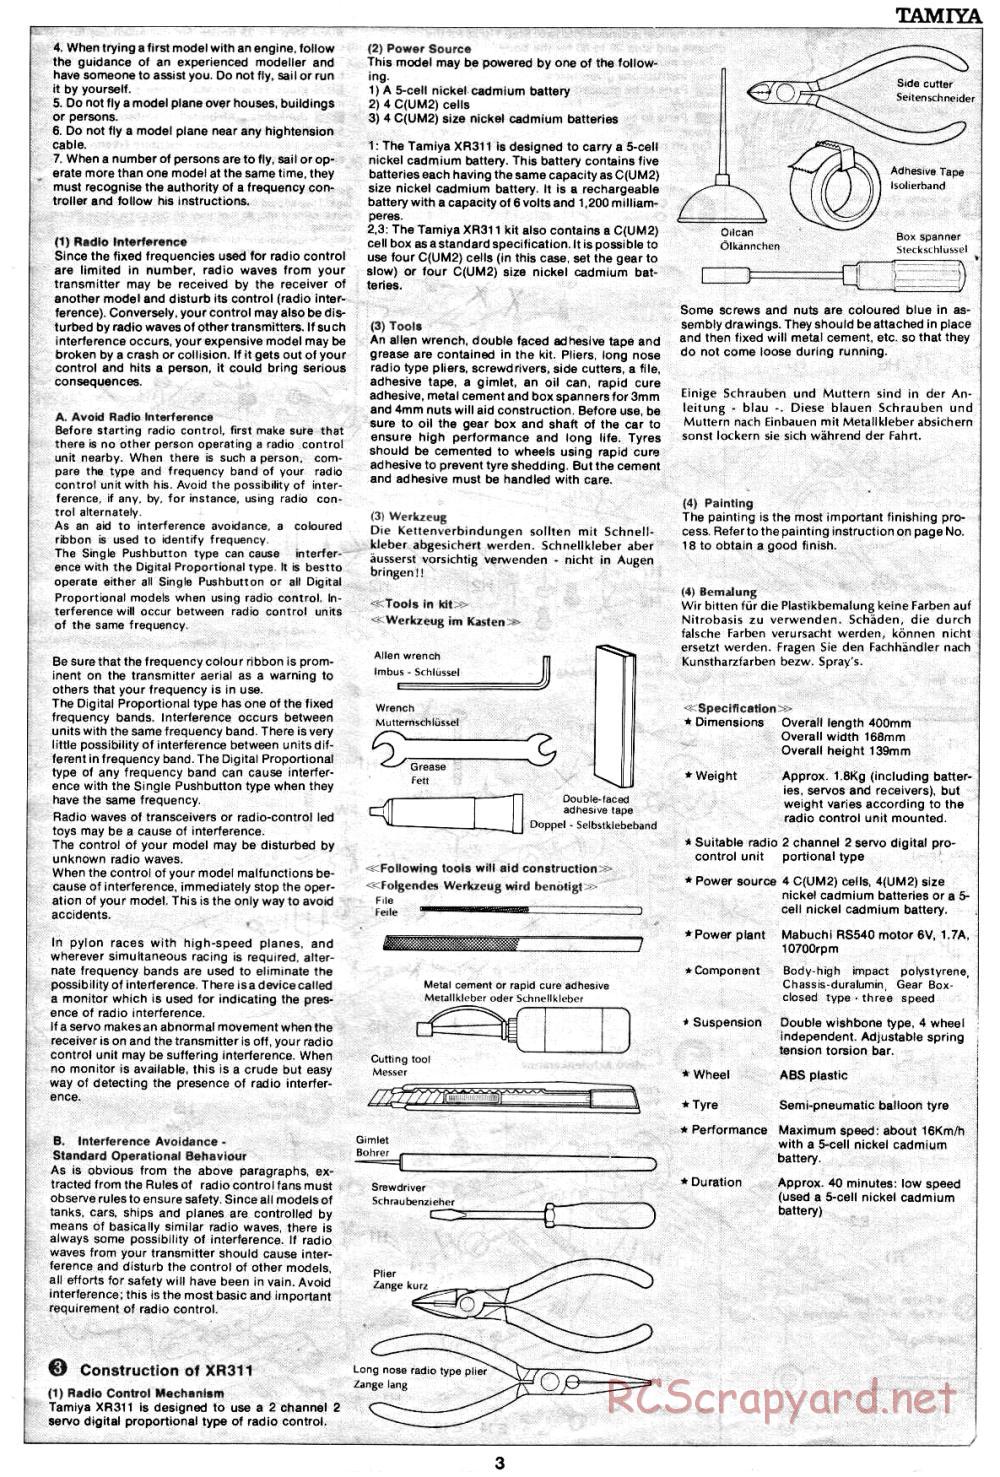 Tamiya - XR311 Combat Support Vehicle (1977) Chassis - Manual - Page 3